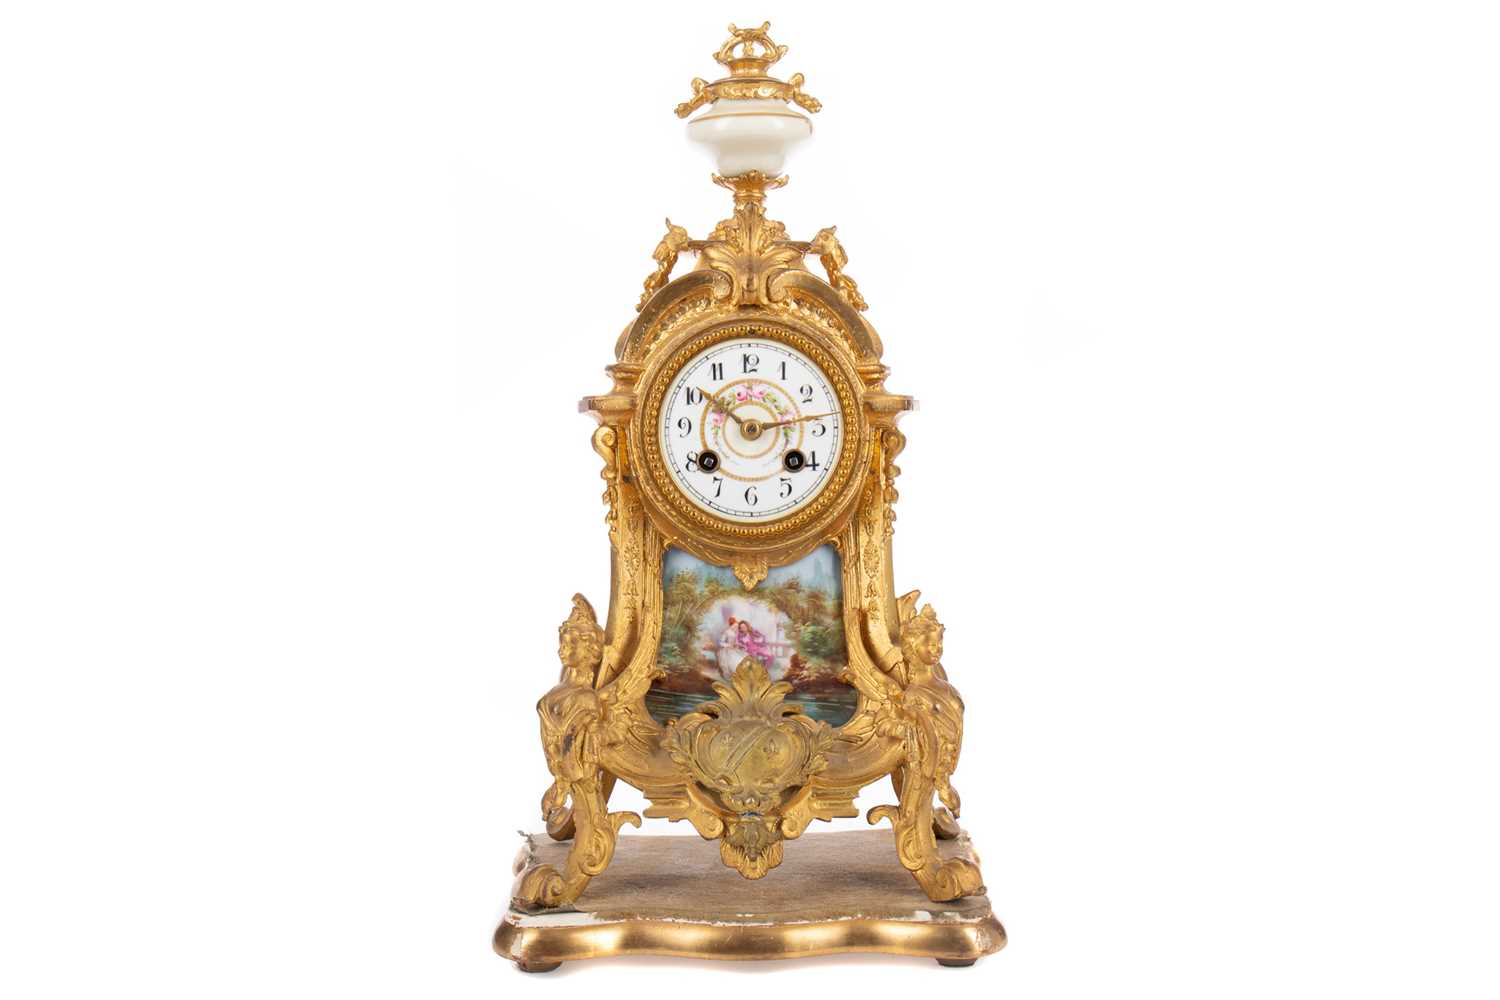 Lot 1118 - A LATE 19TH CENTURY FRENCH GILTMETAL AND PORCELAIN MANTEL CLOCK